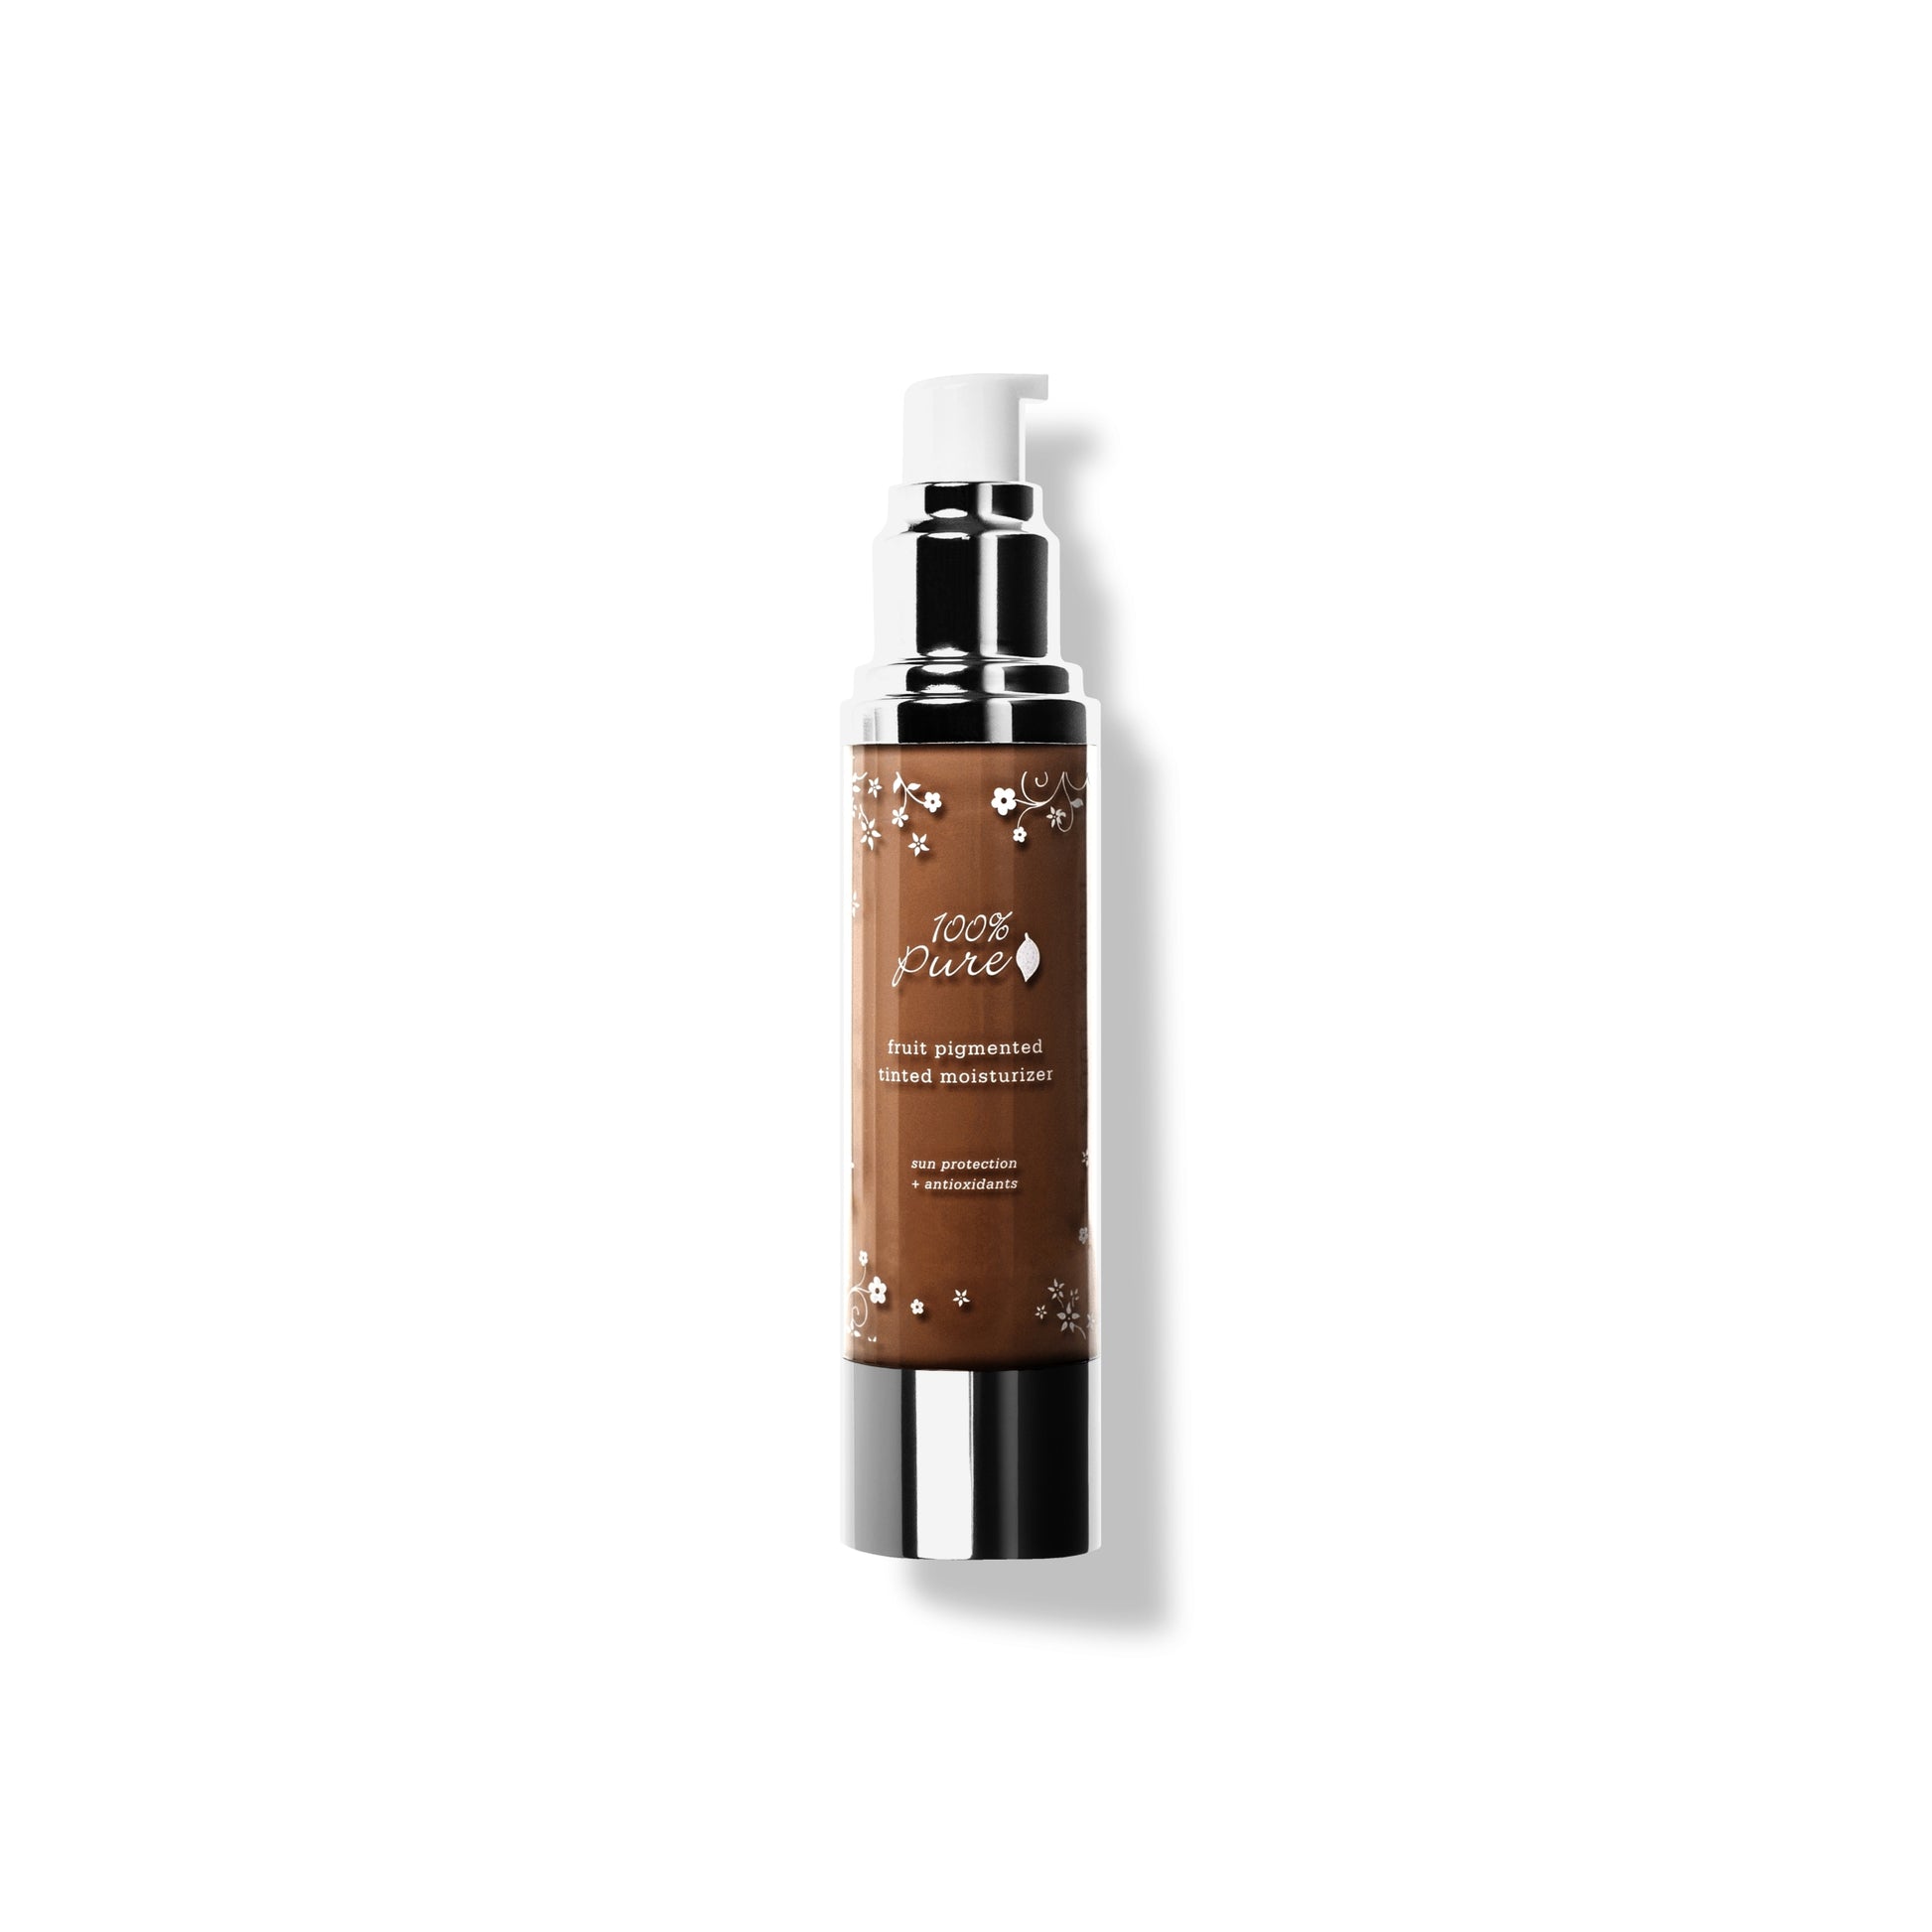 100% PURE Fruit Pigmented Tinted Moisturizer cocoa